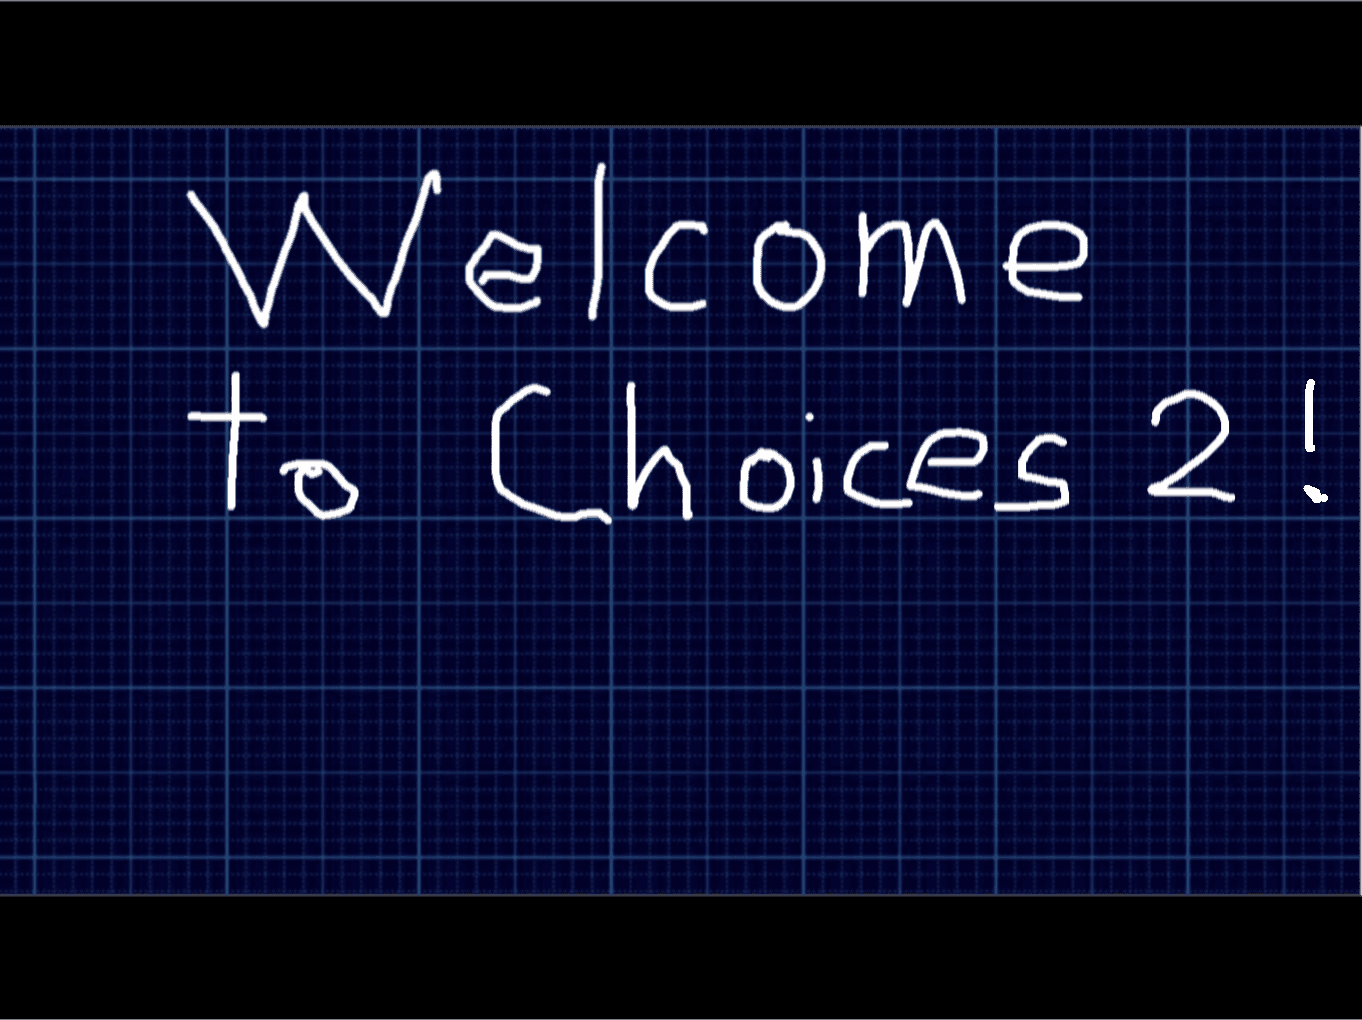 Choices for you